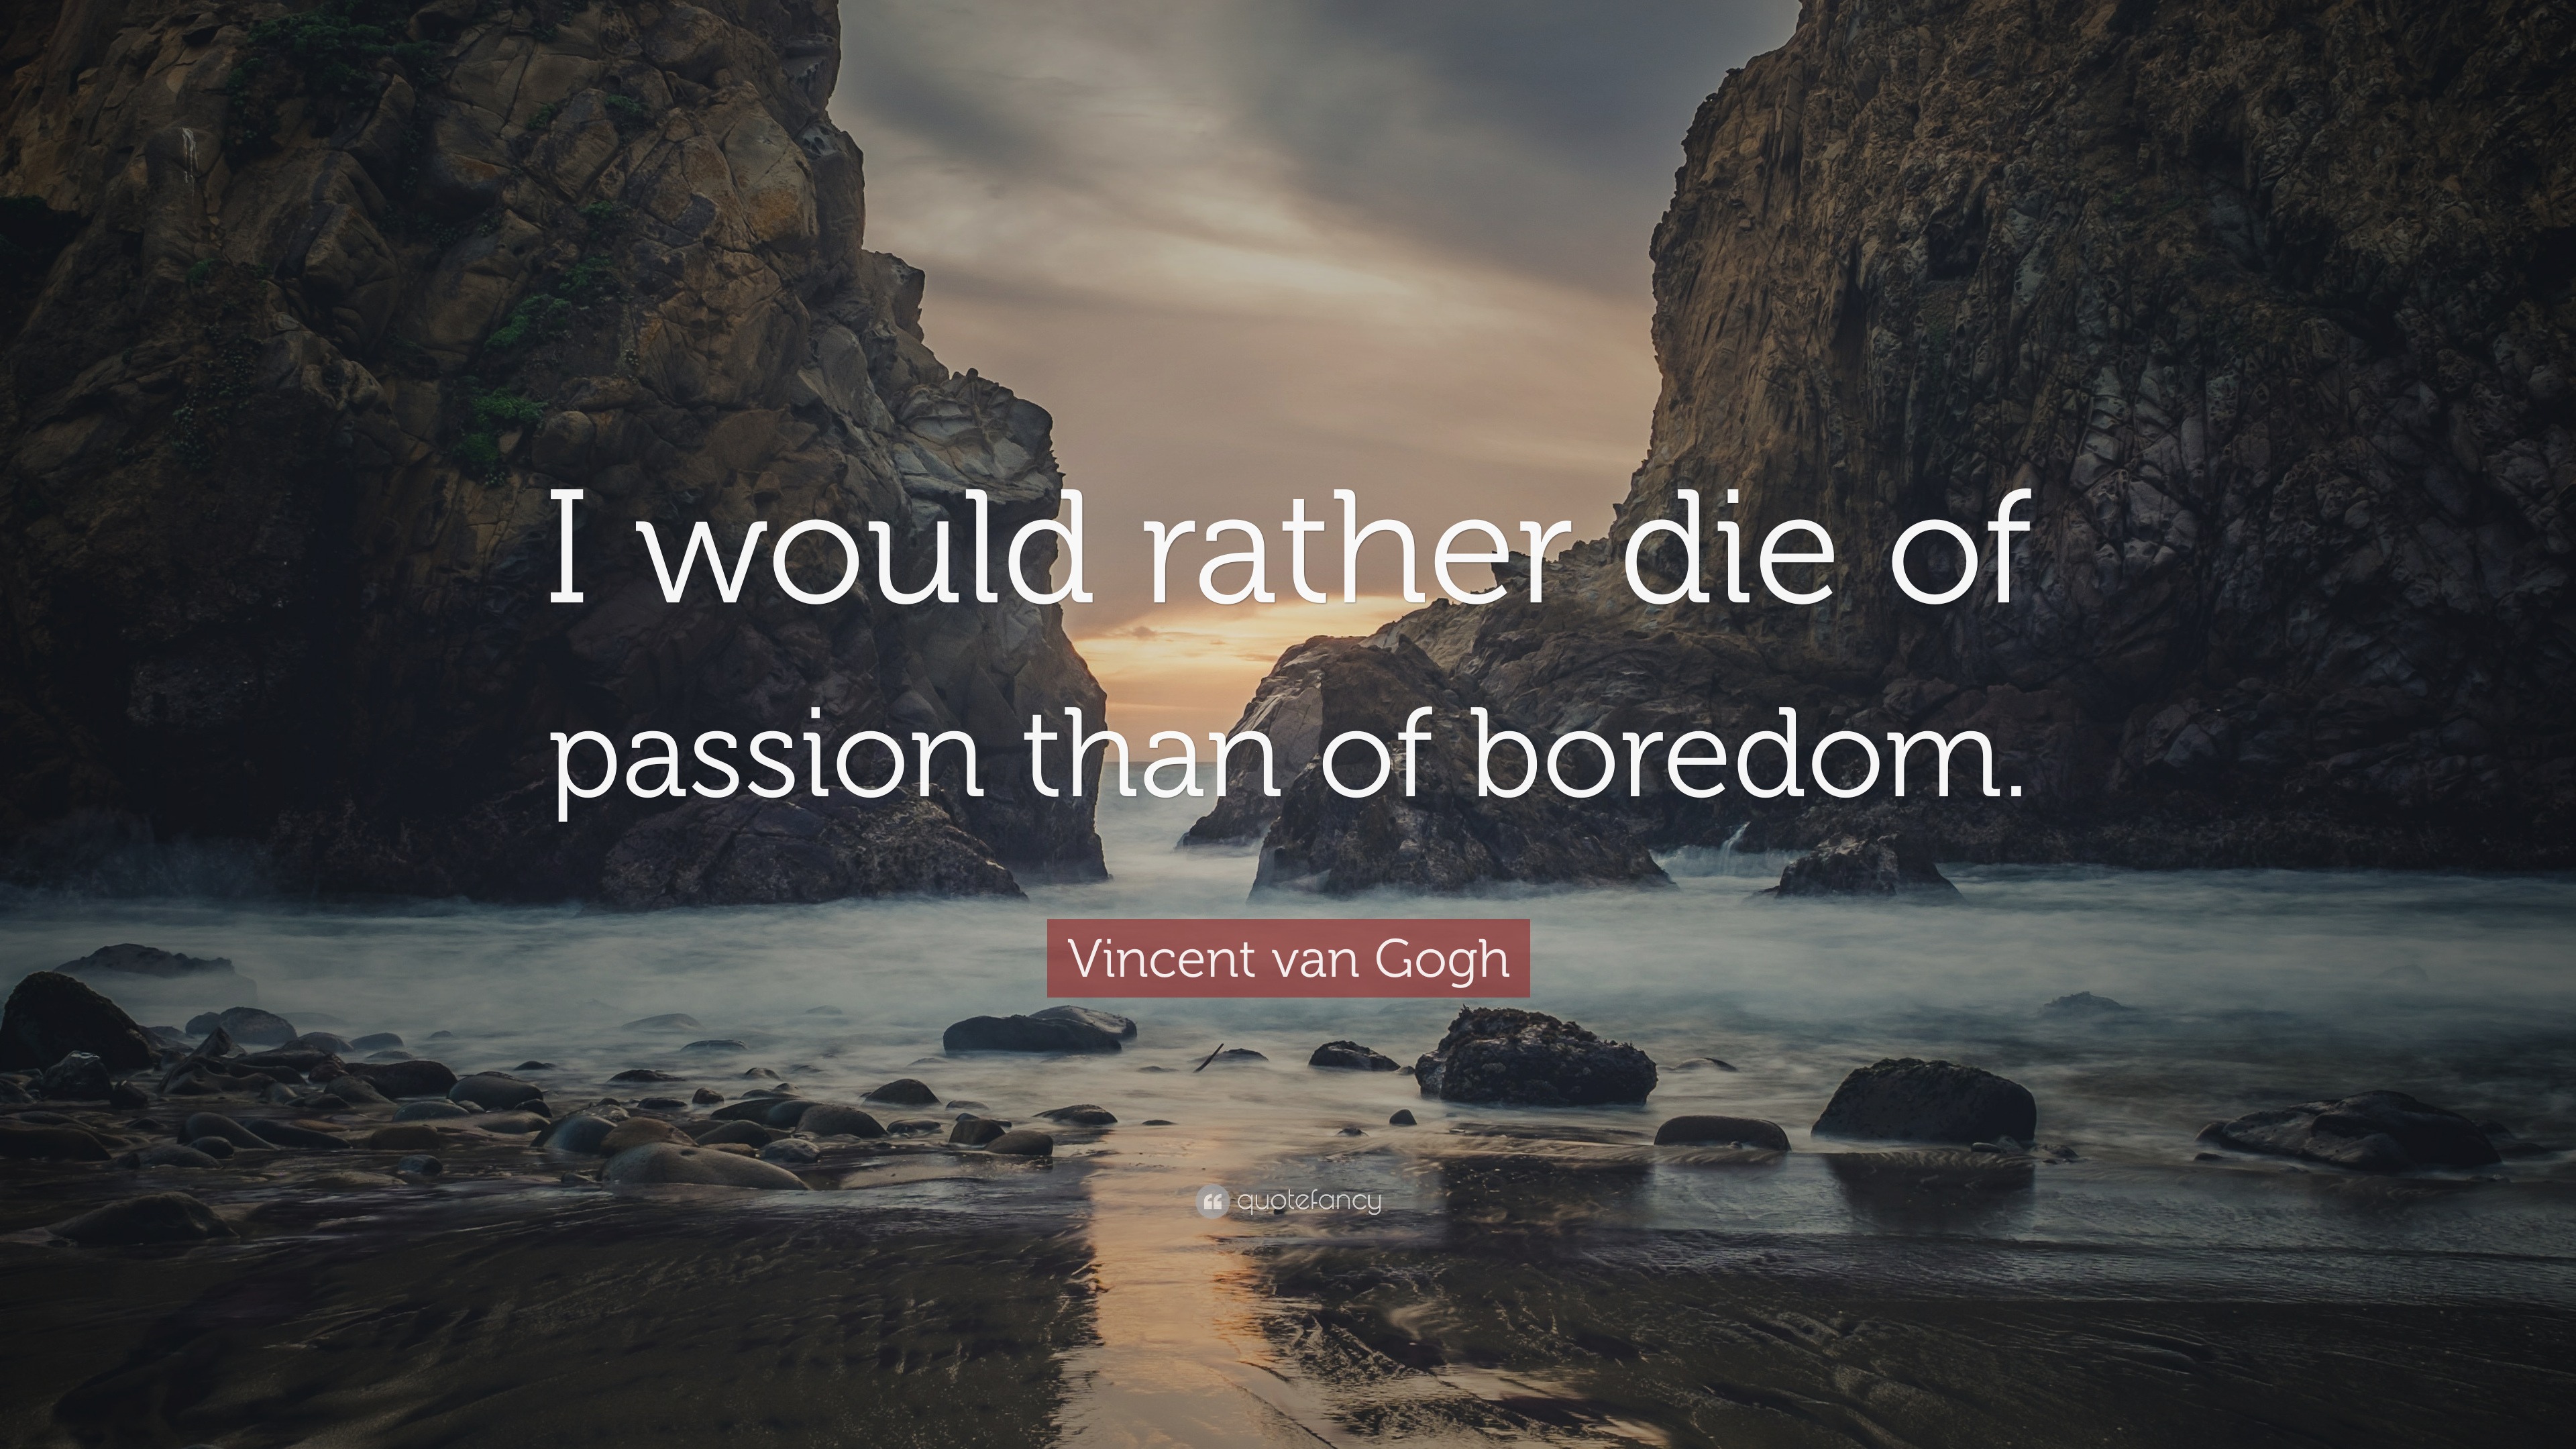 Vincent van Gogh Quote: “I would rather die of passion than of boredom.”